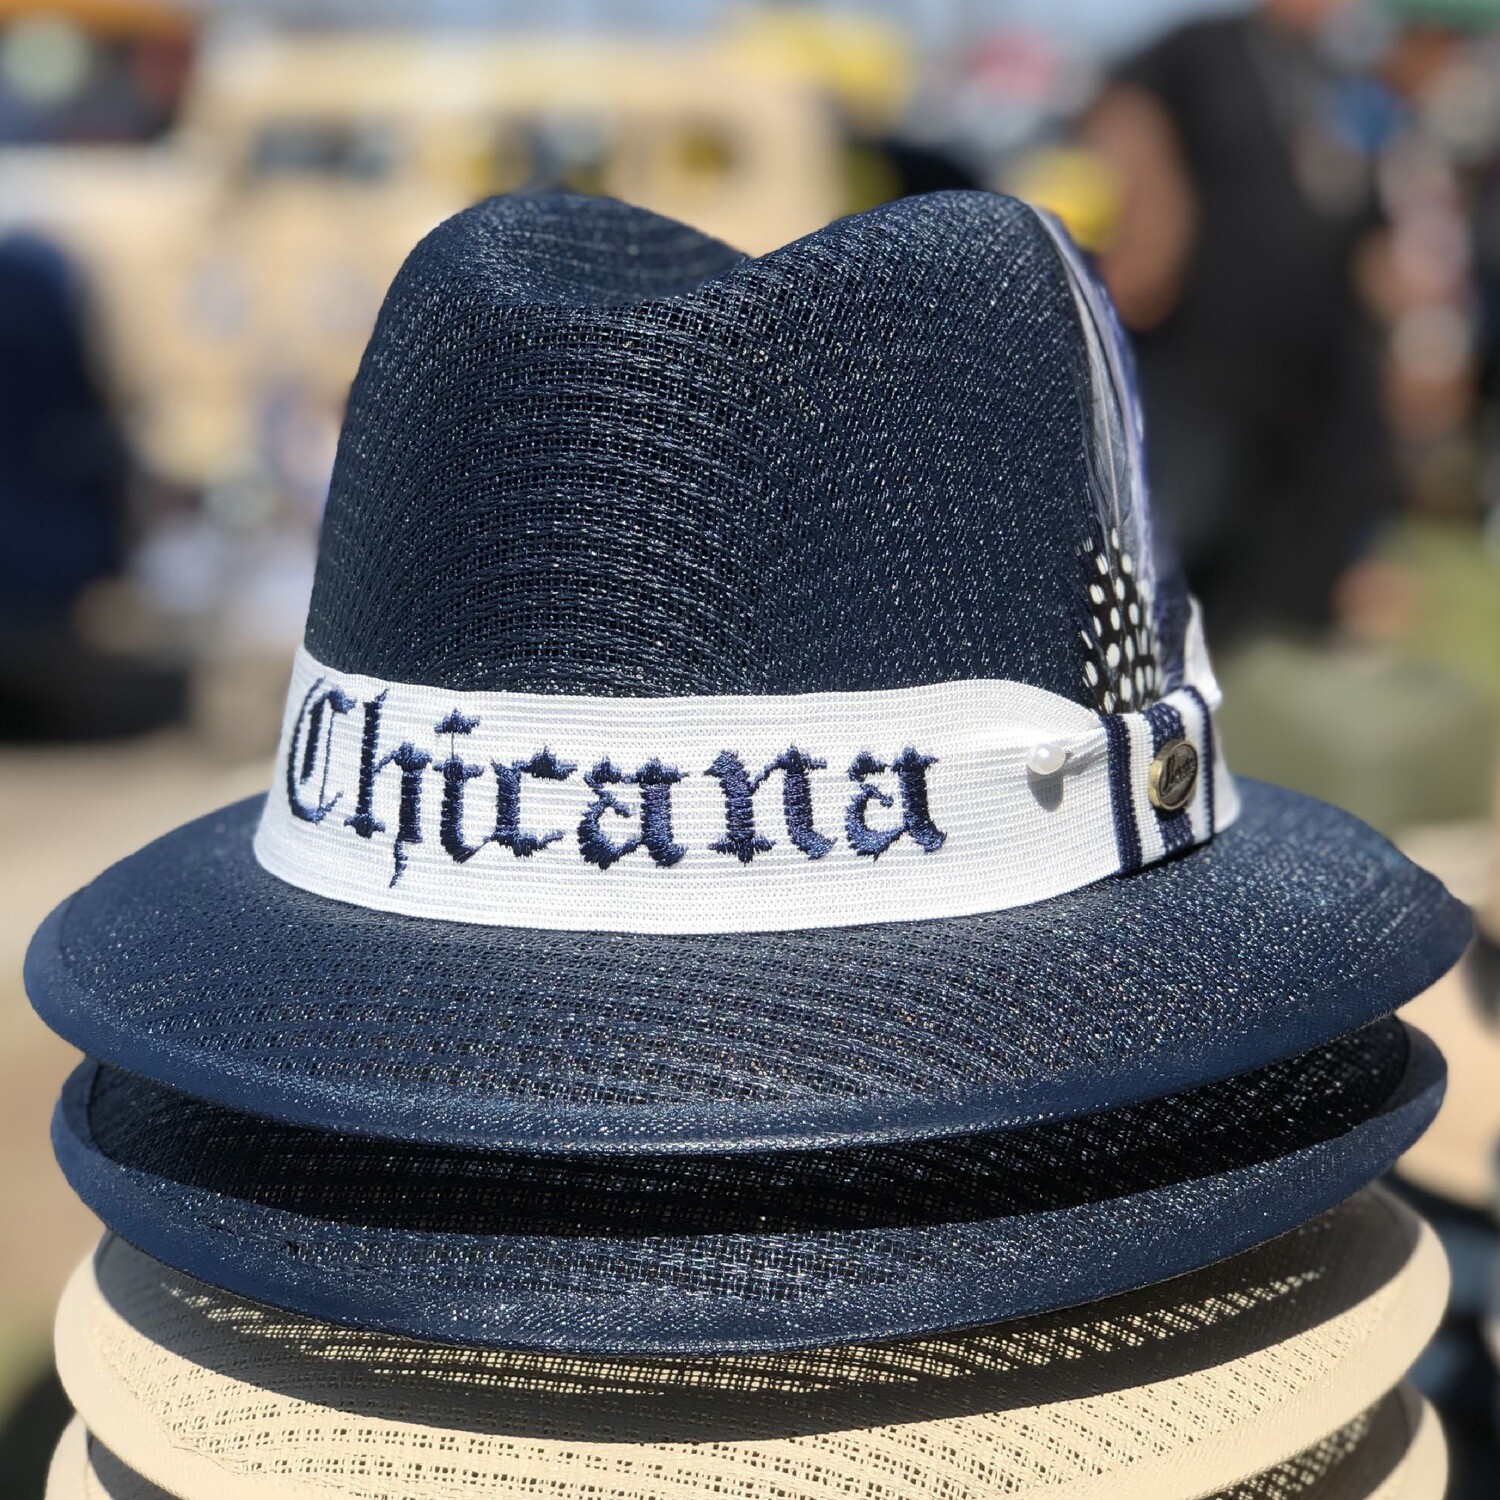 Navy Blue Derby w/ Chicana Embroidery